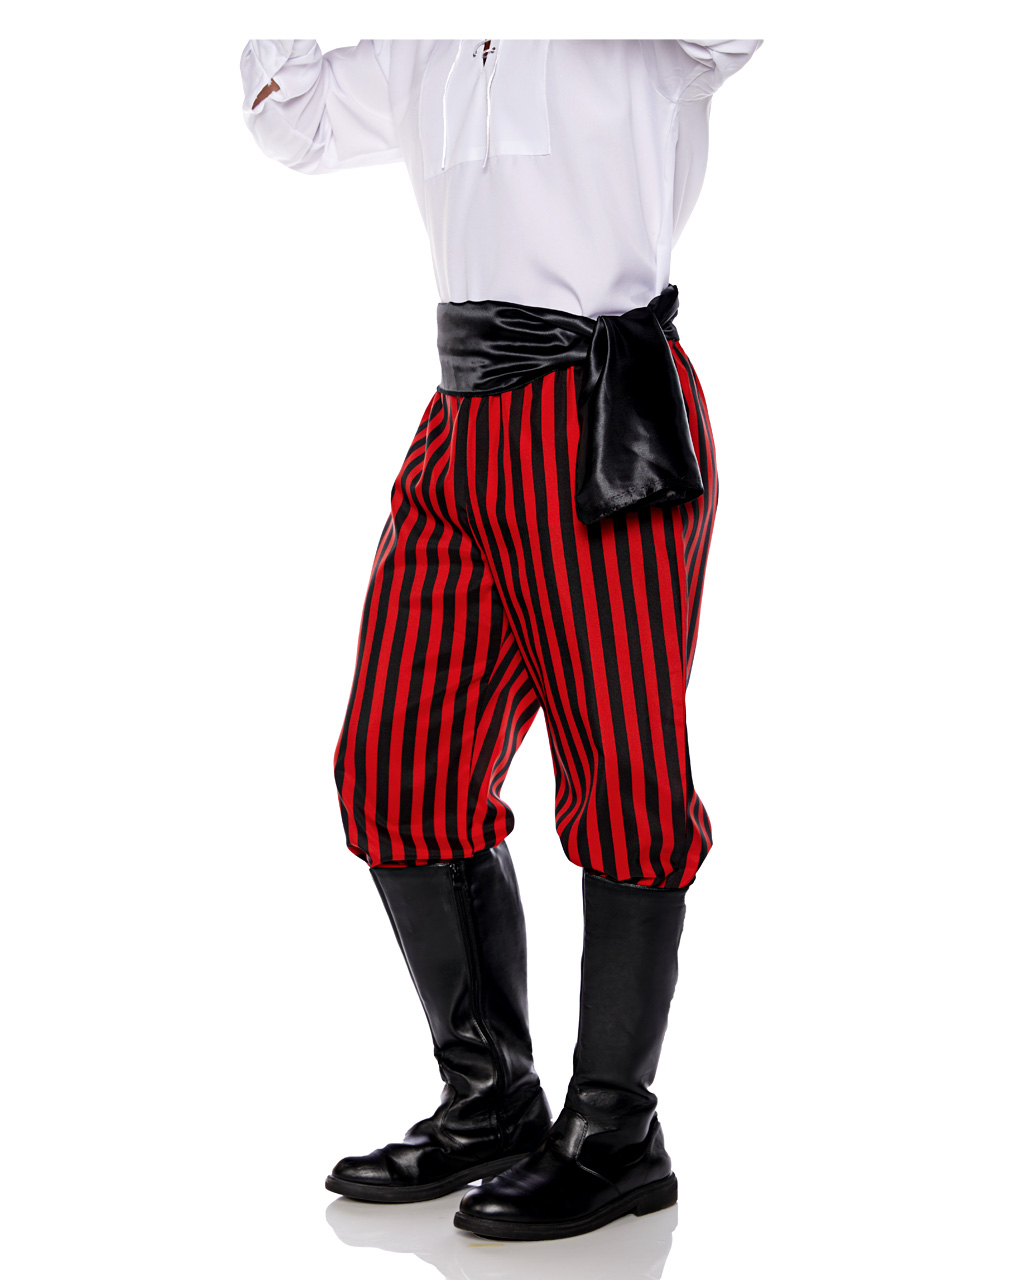 Red and Black Striped Pirate Trousers at Horror-Shop.com